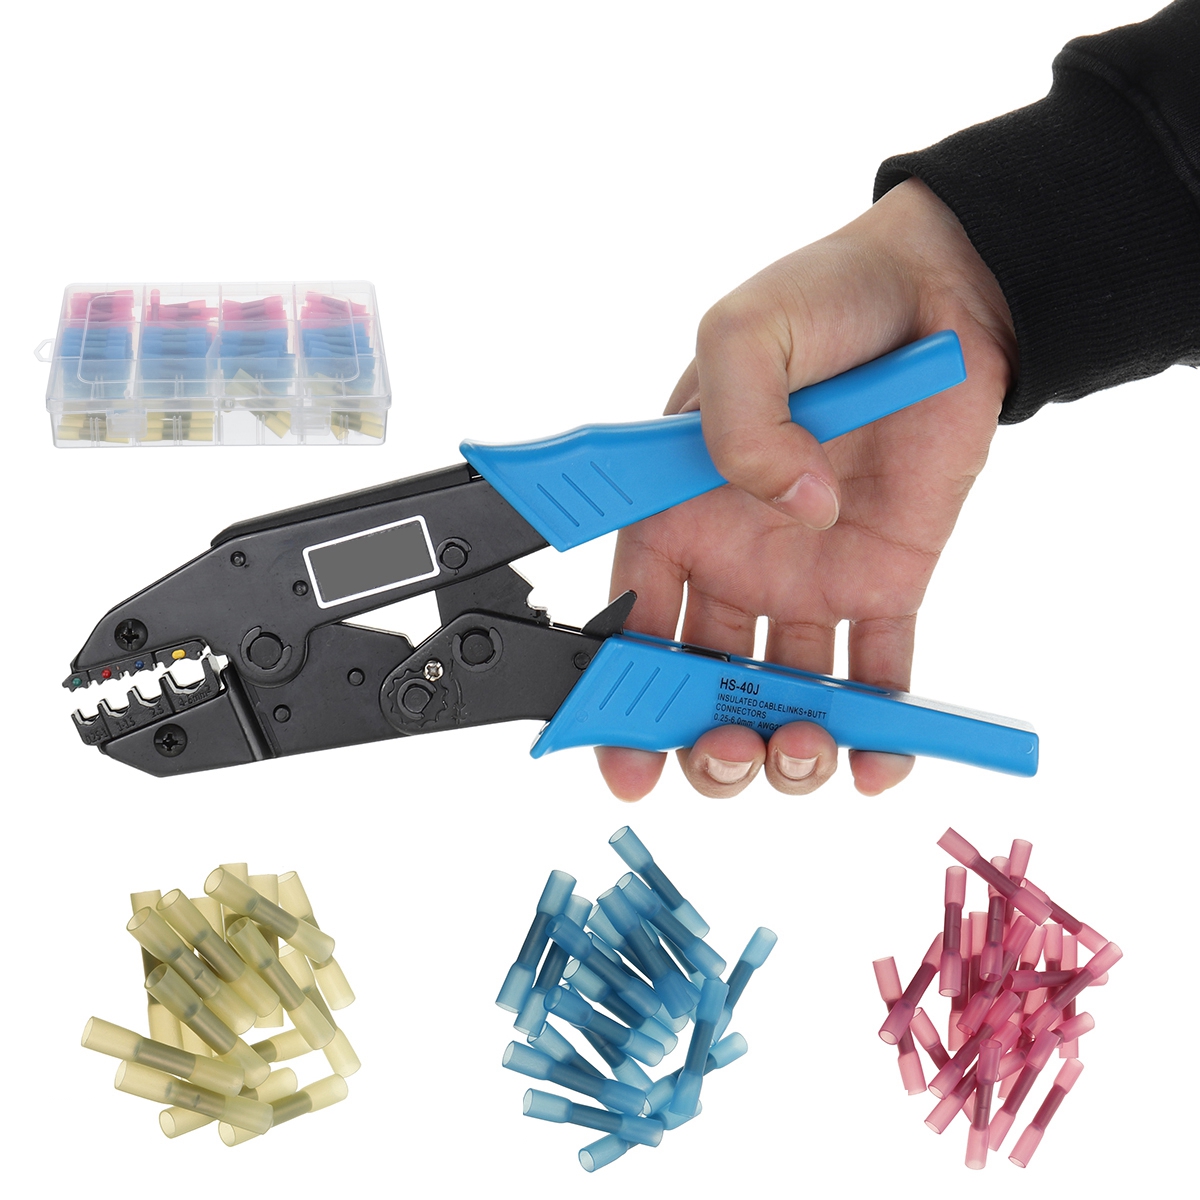 

200Pcs Waterproof Terminal Block Crimping Plier Set 90X 22-16AWG+ 90X 16-14AWG+ 20X 12-10AWG Shrink Butt Cable Connector